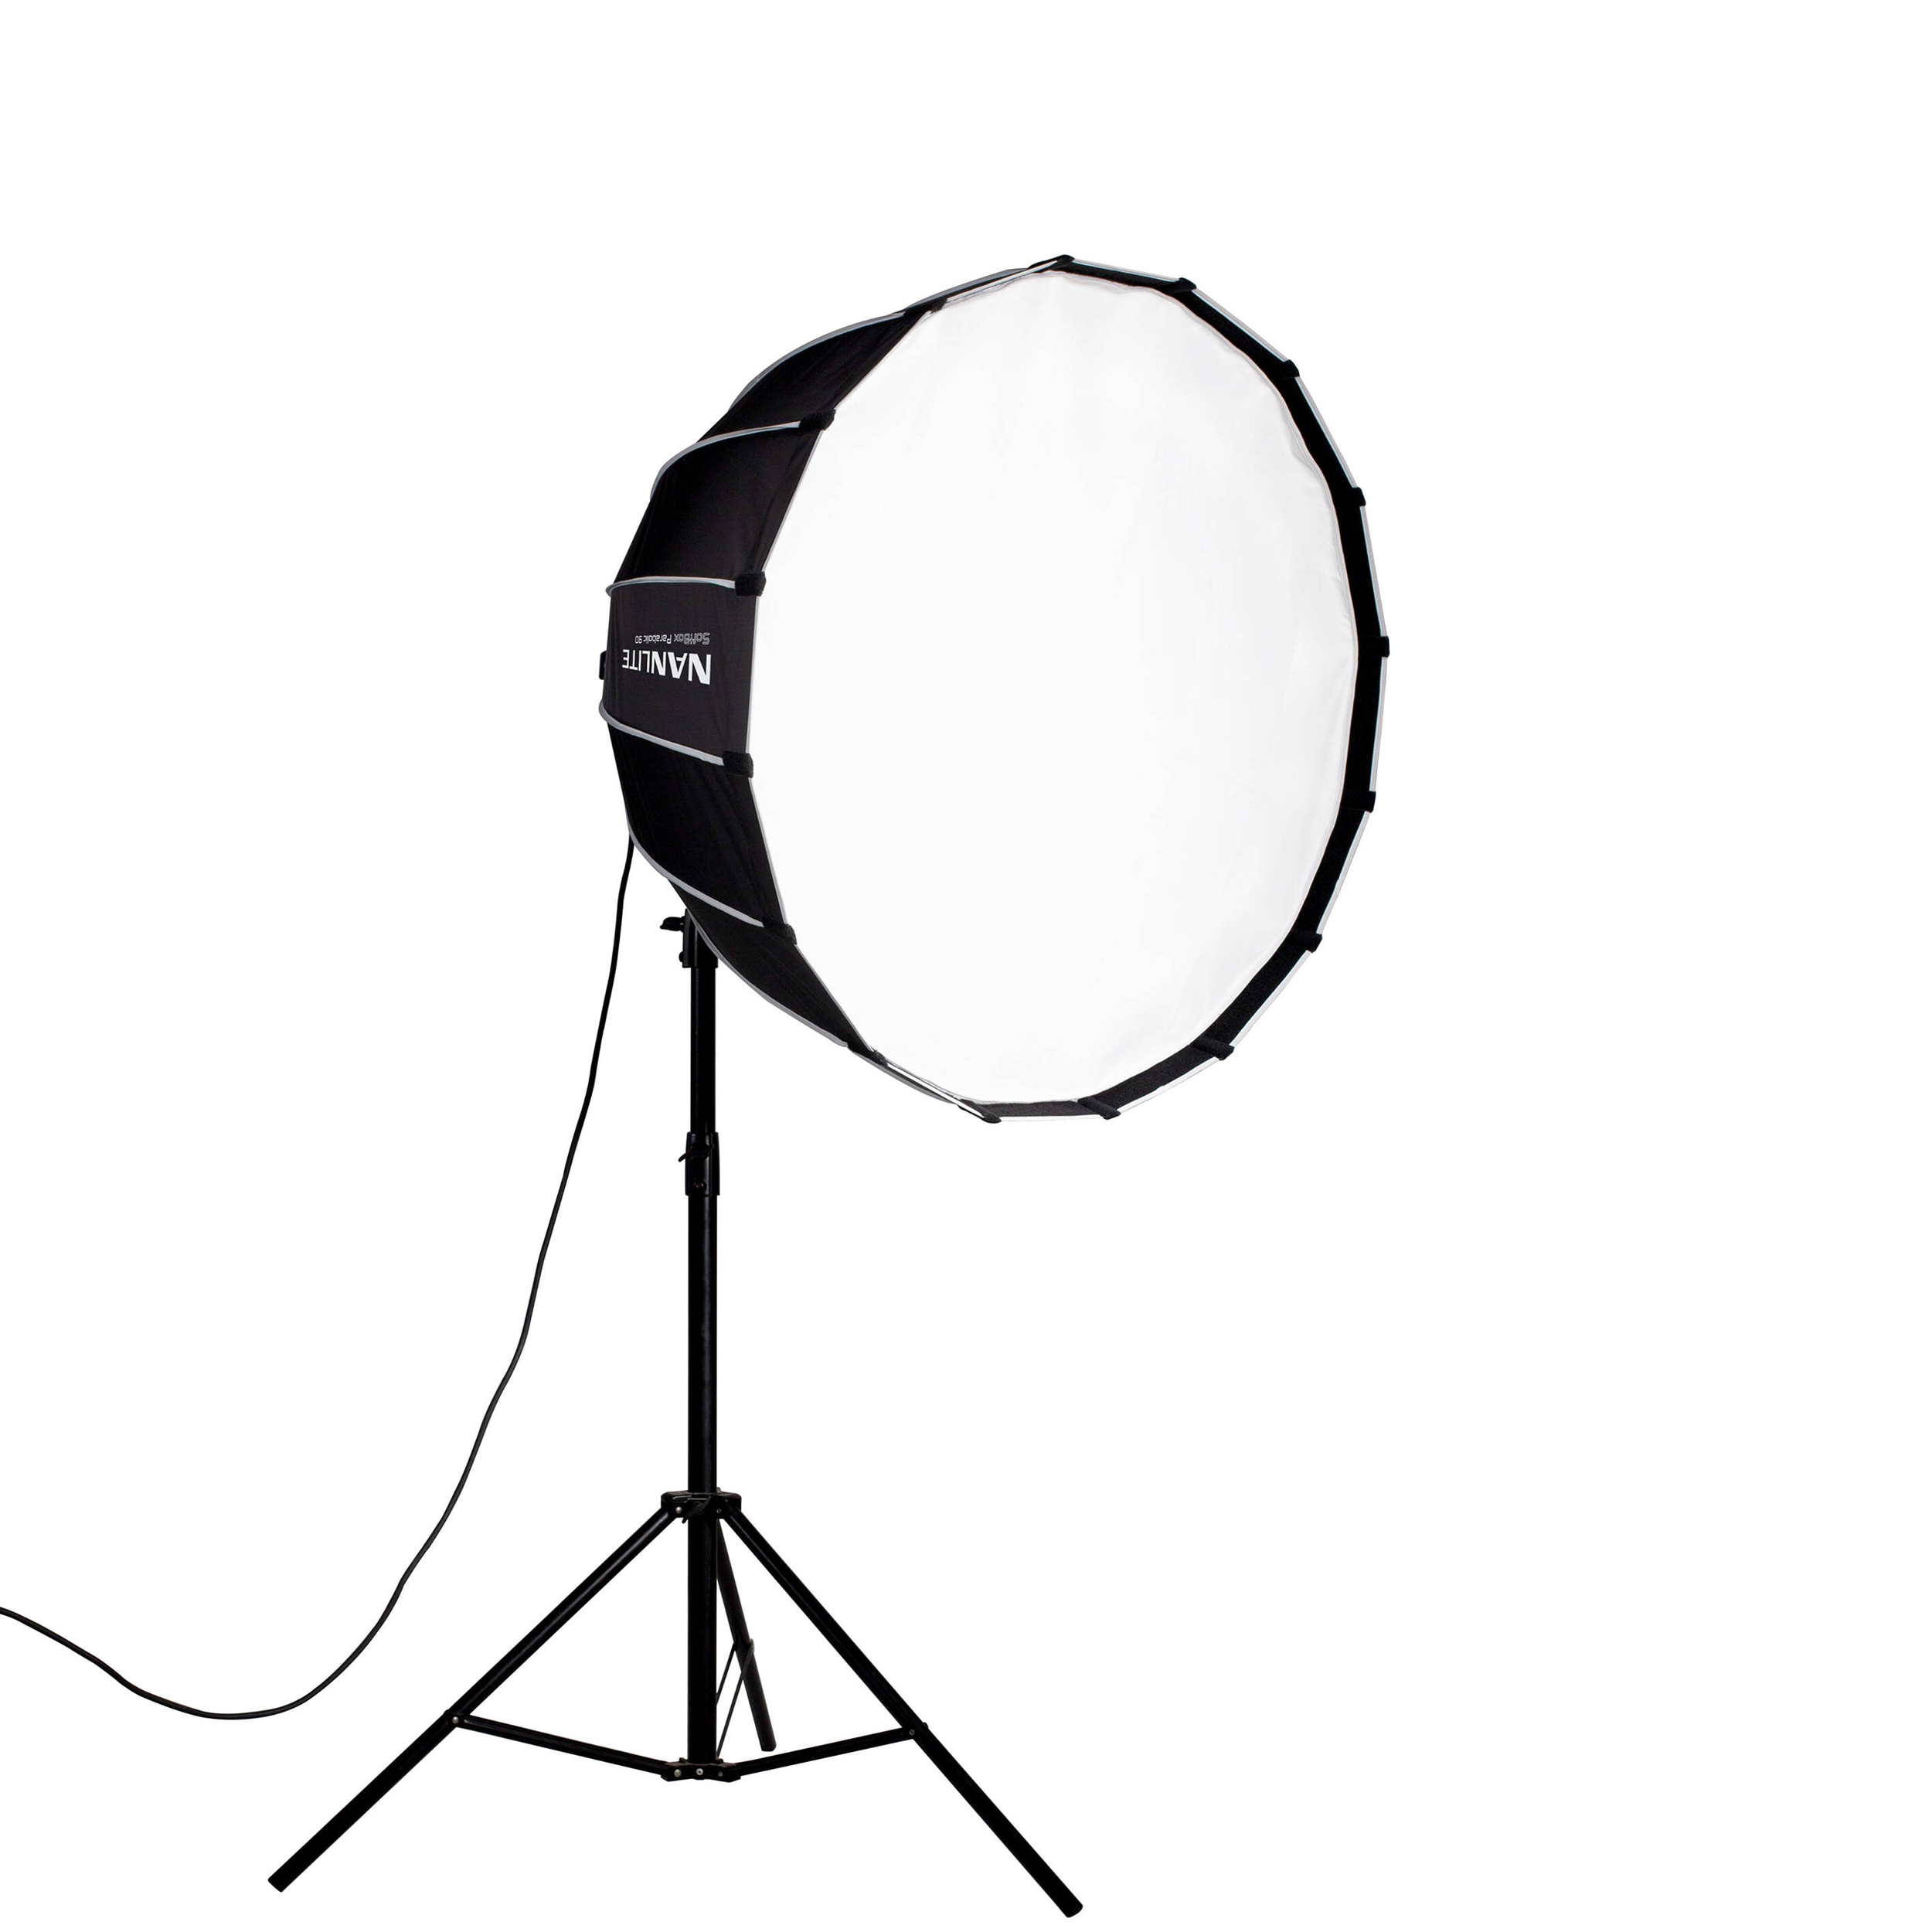 Nanlite Para 90 Quick-Open Softbox with Bowens Mount (35")